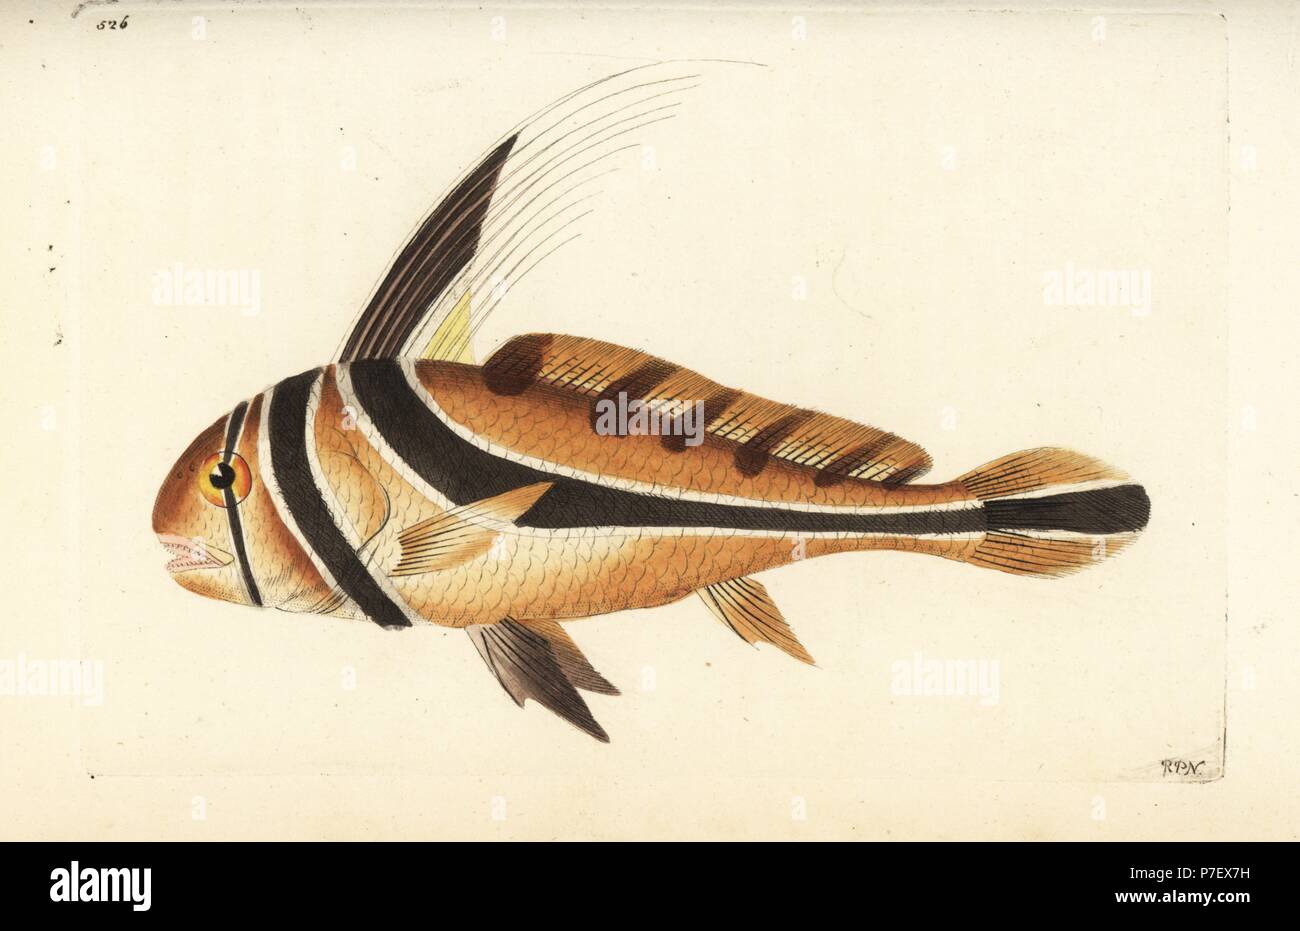 Jack knife-fish, Equetus lanceolatus (Knight fish, Eques americana). Illustration drawn and engraved by Richard Polydore Nodder. Handcoloured copperplate engraving from George Shaw and Frederick Nodder's The Naturalist's Miscellany, London, 1802. Stock Photo